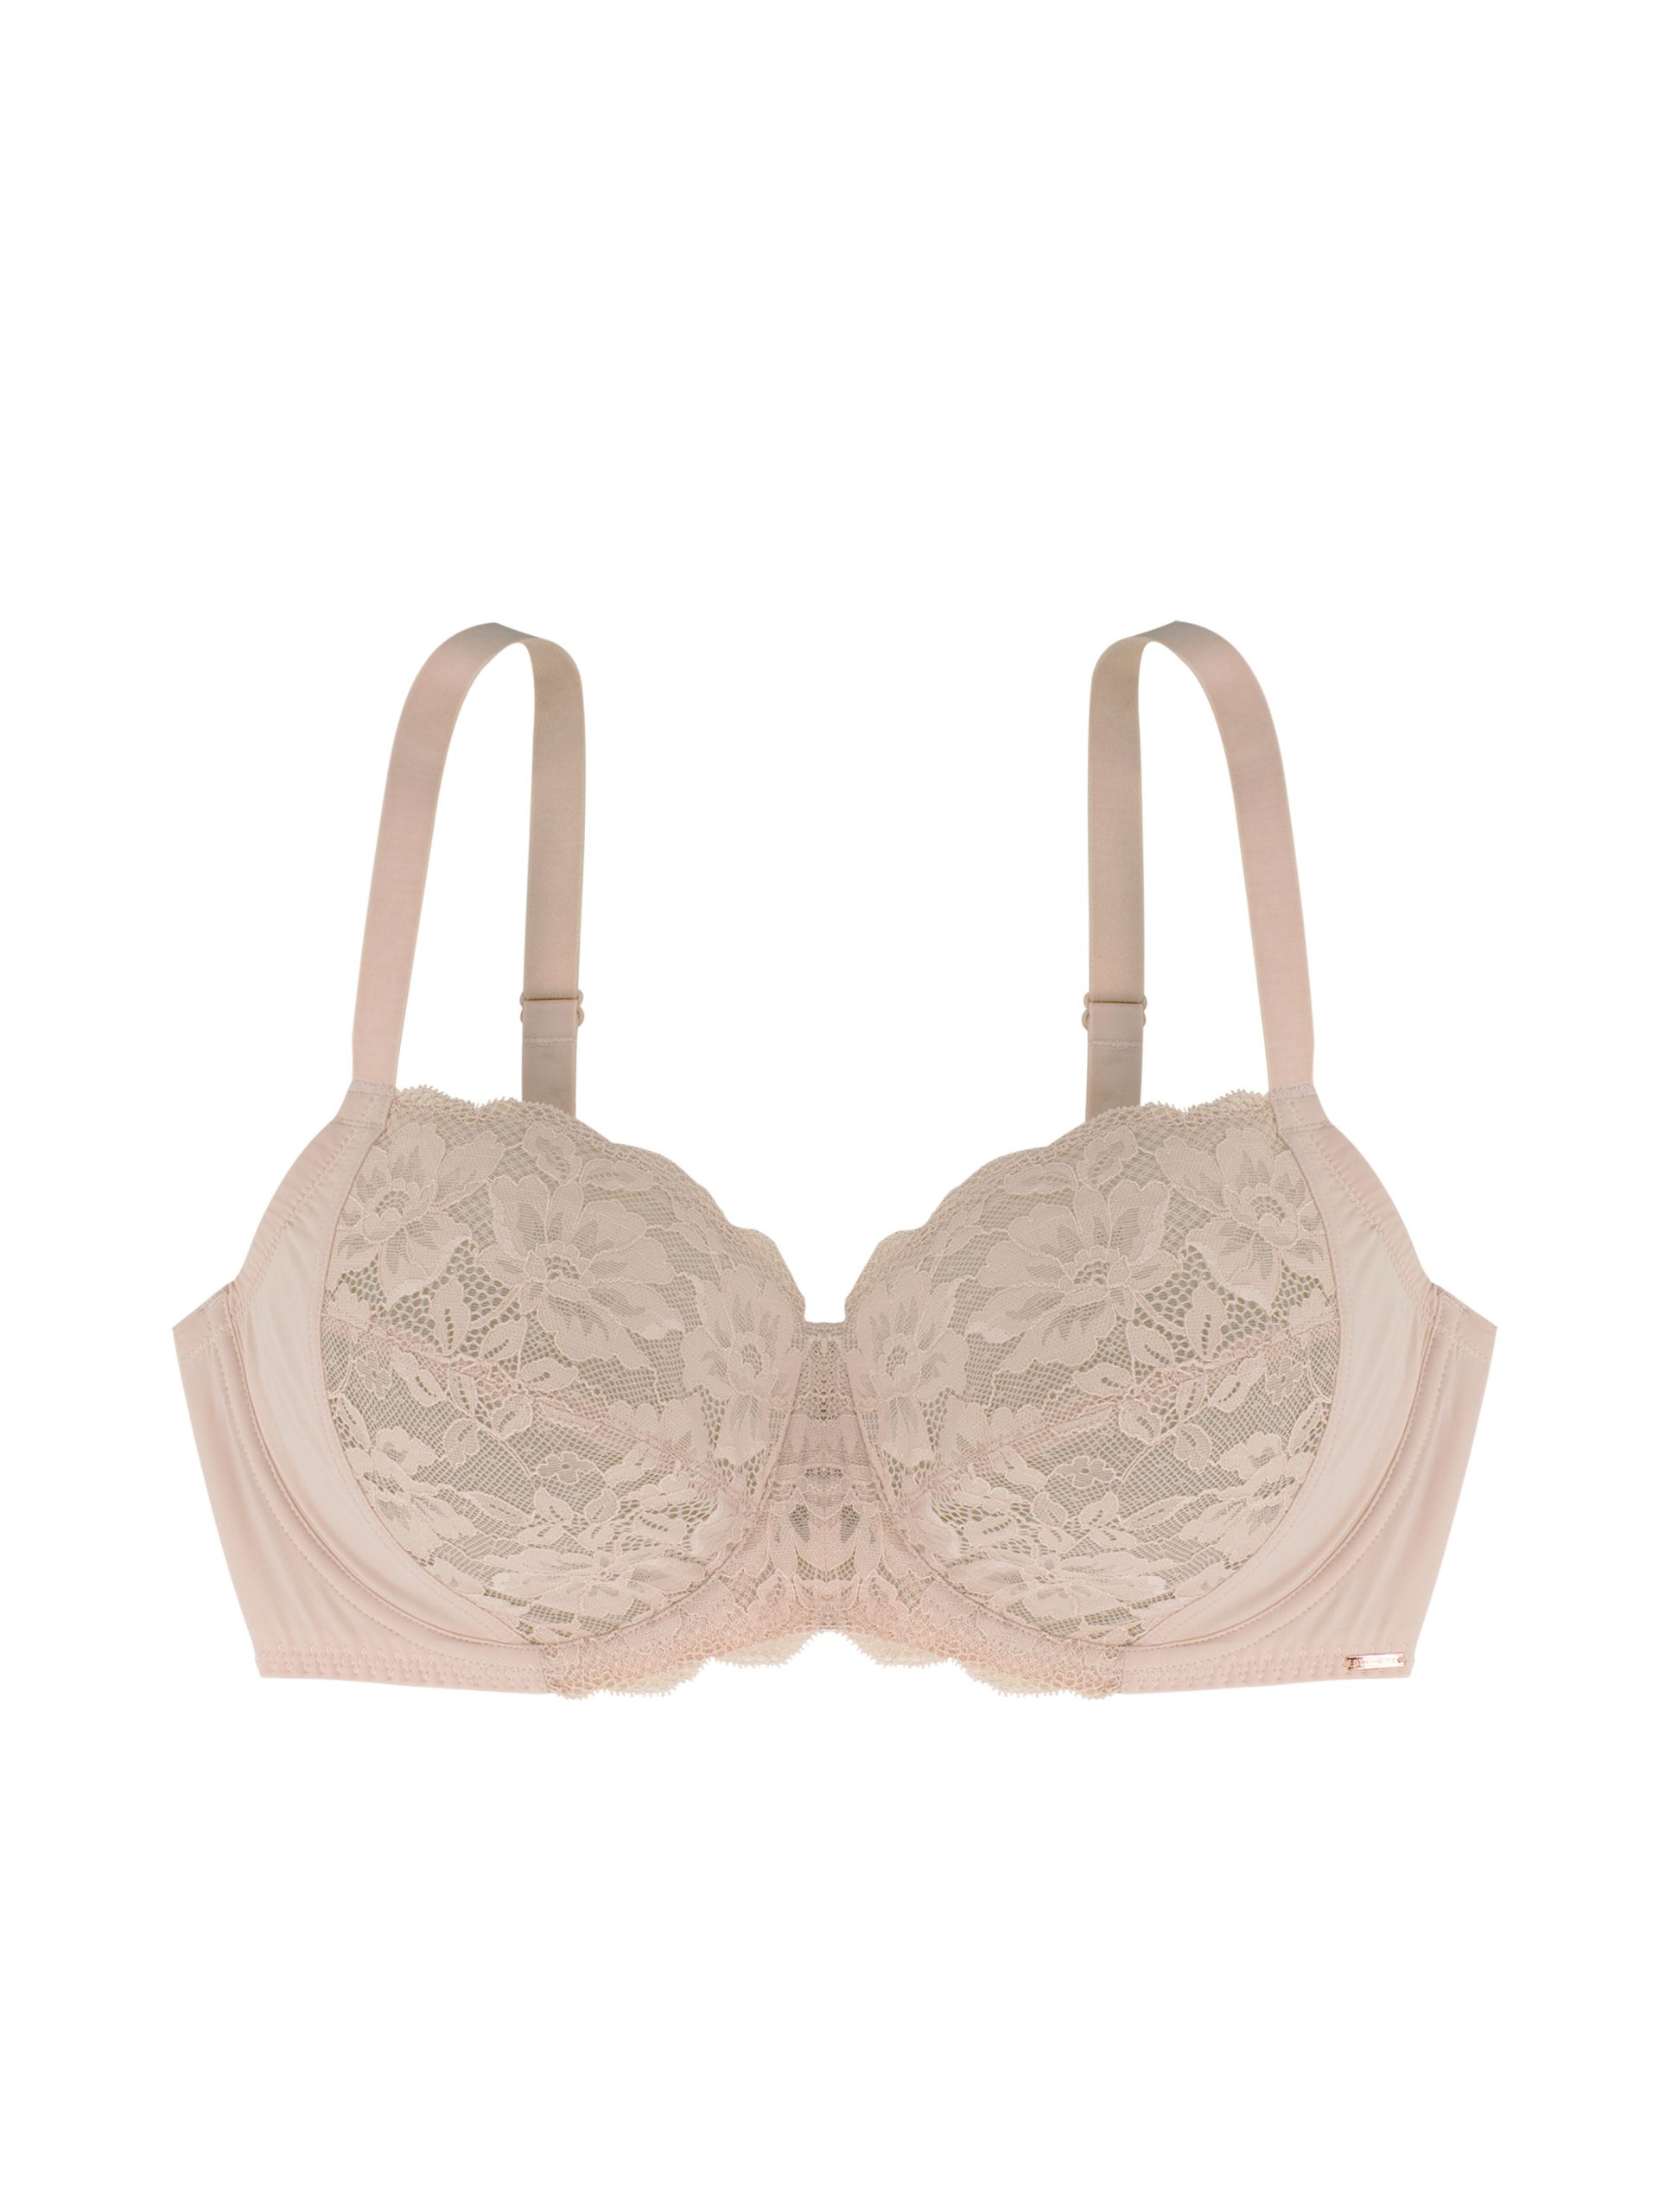 Buy Planetinner Non Padded Non Wired Melange Fabric Super Support Bra -  Peach at Rs.400 online